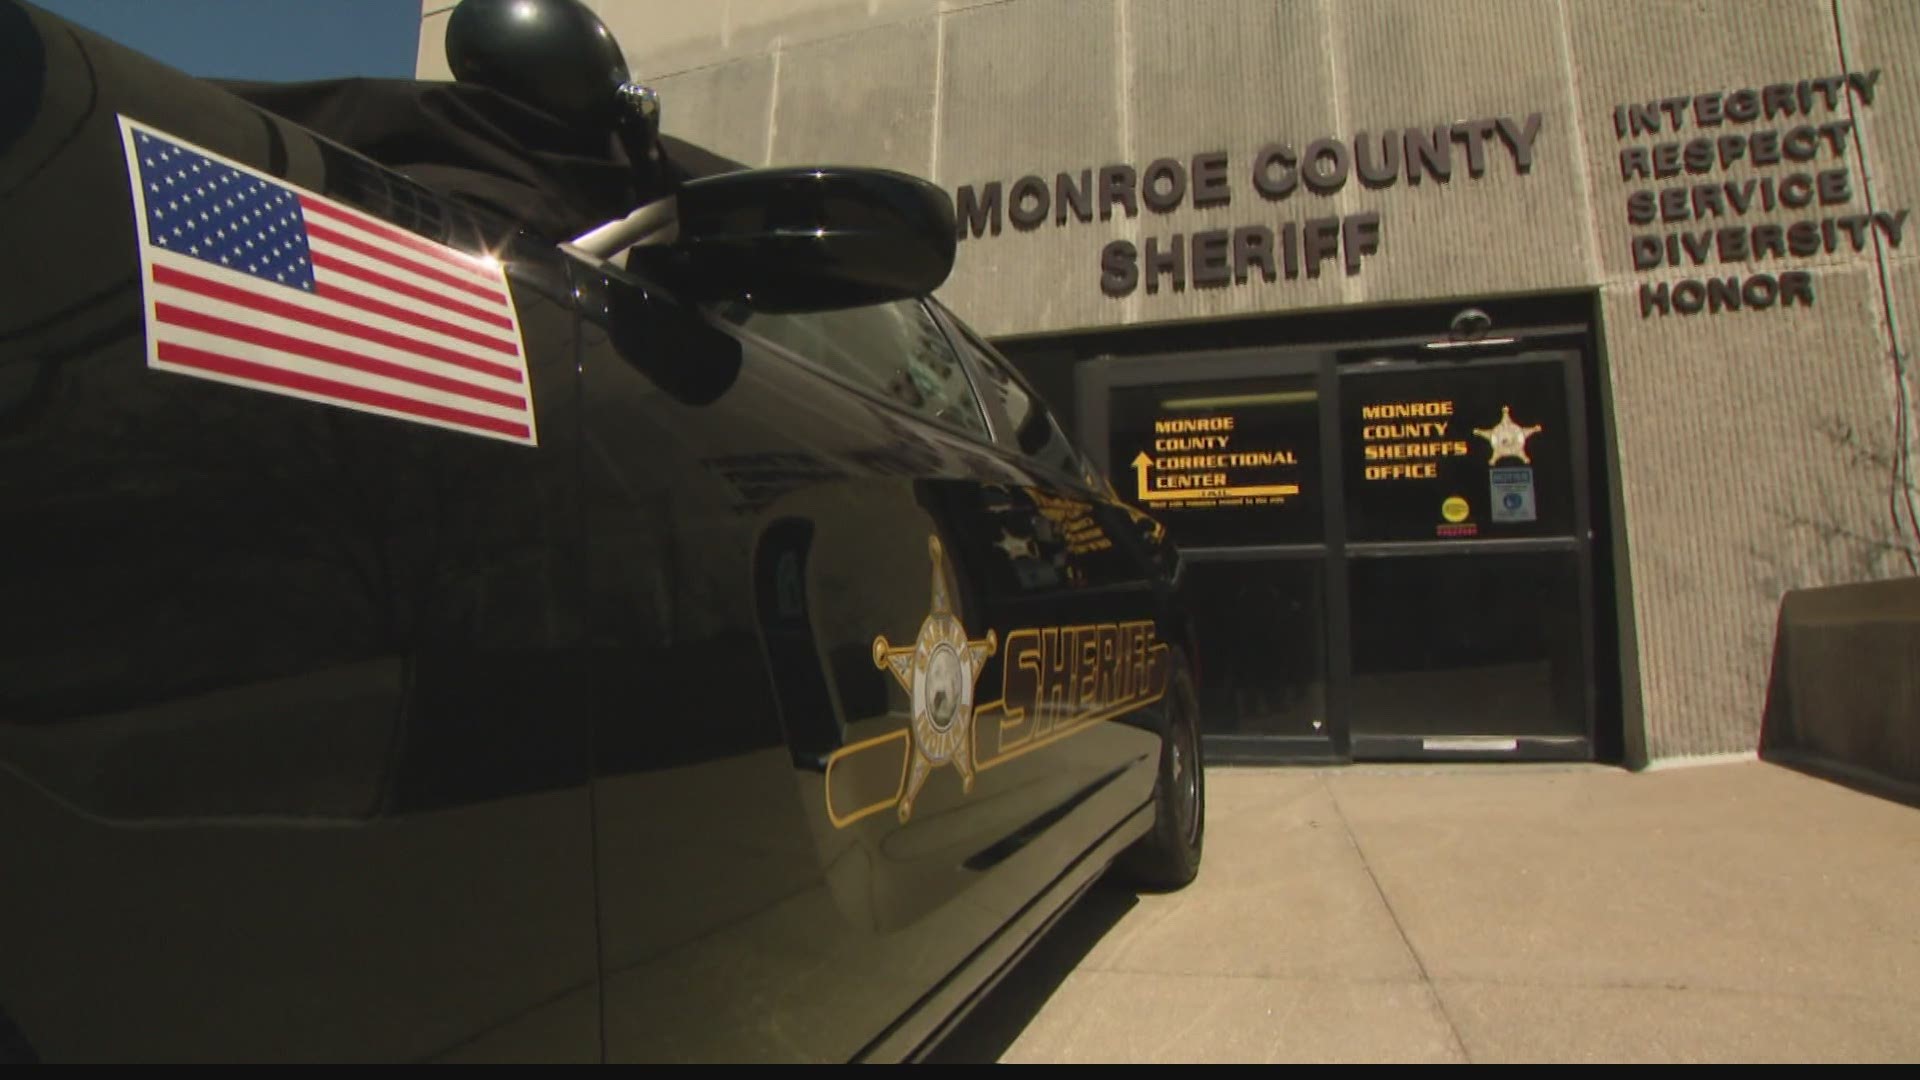 The community is mourning the loss of Monroe County Reserve Deputy James Driver after he was killed in a crash while on duty Monday afternoon.